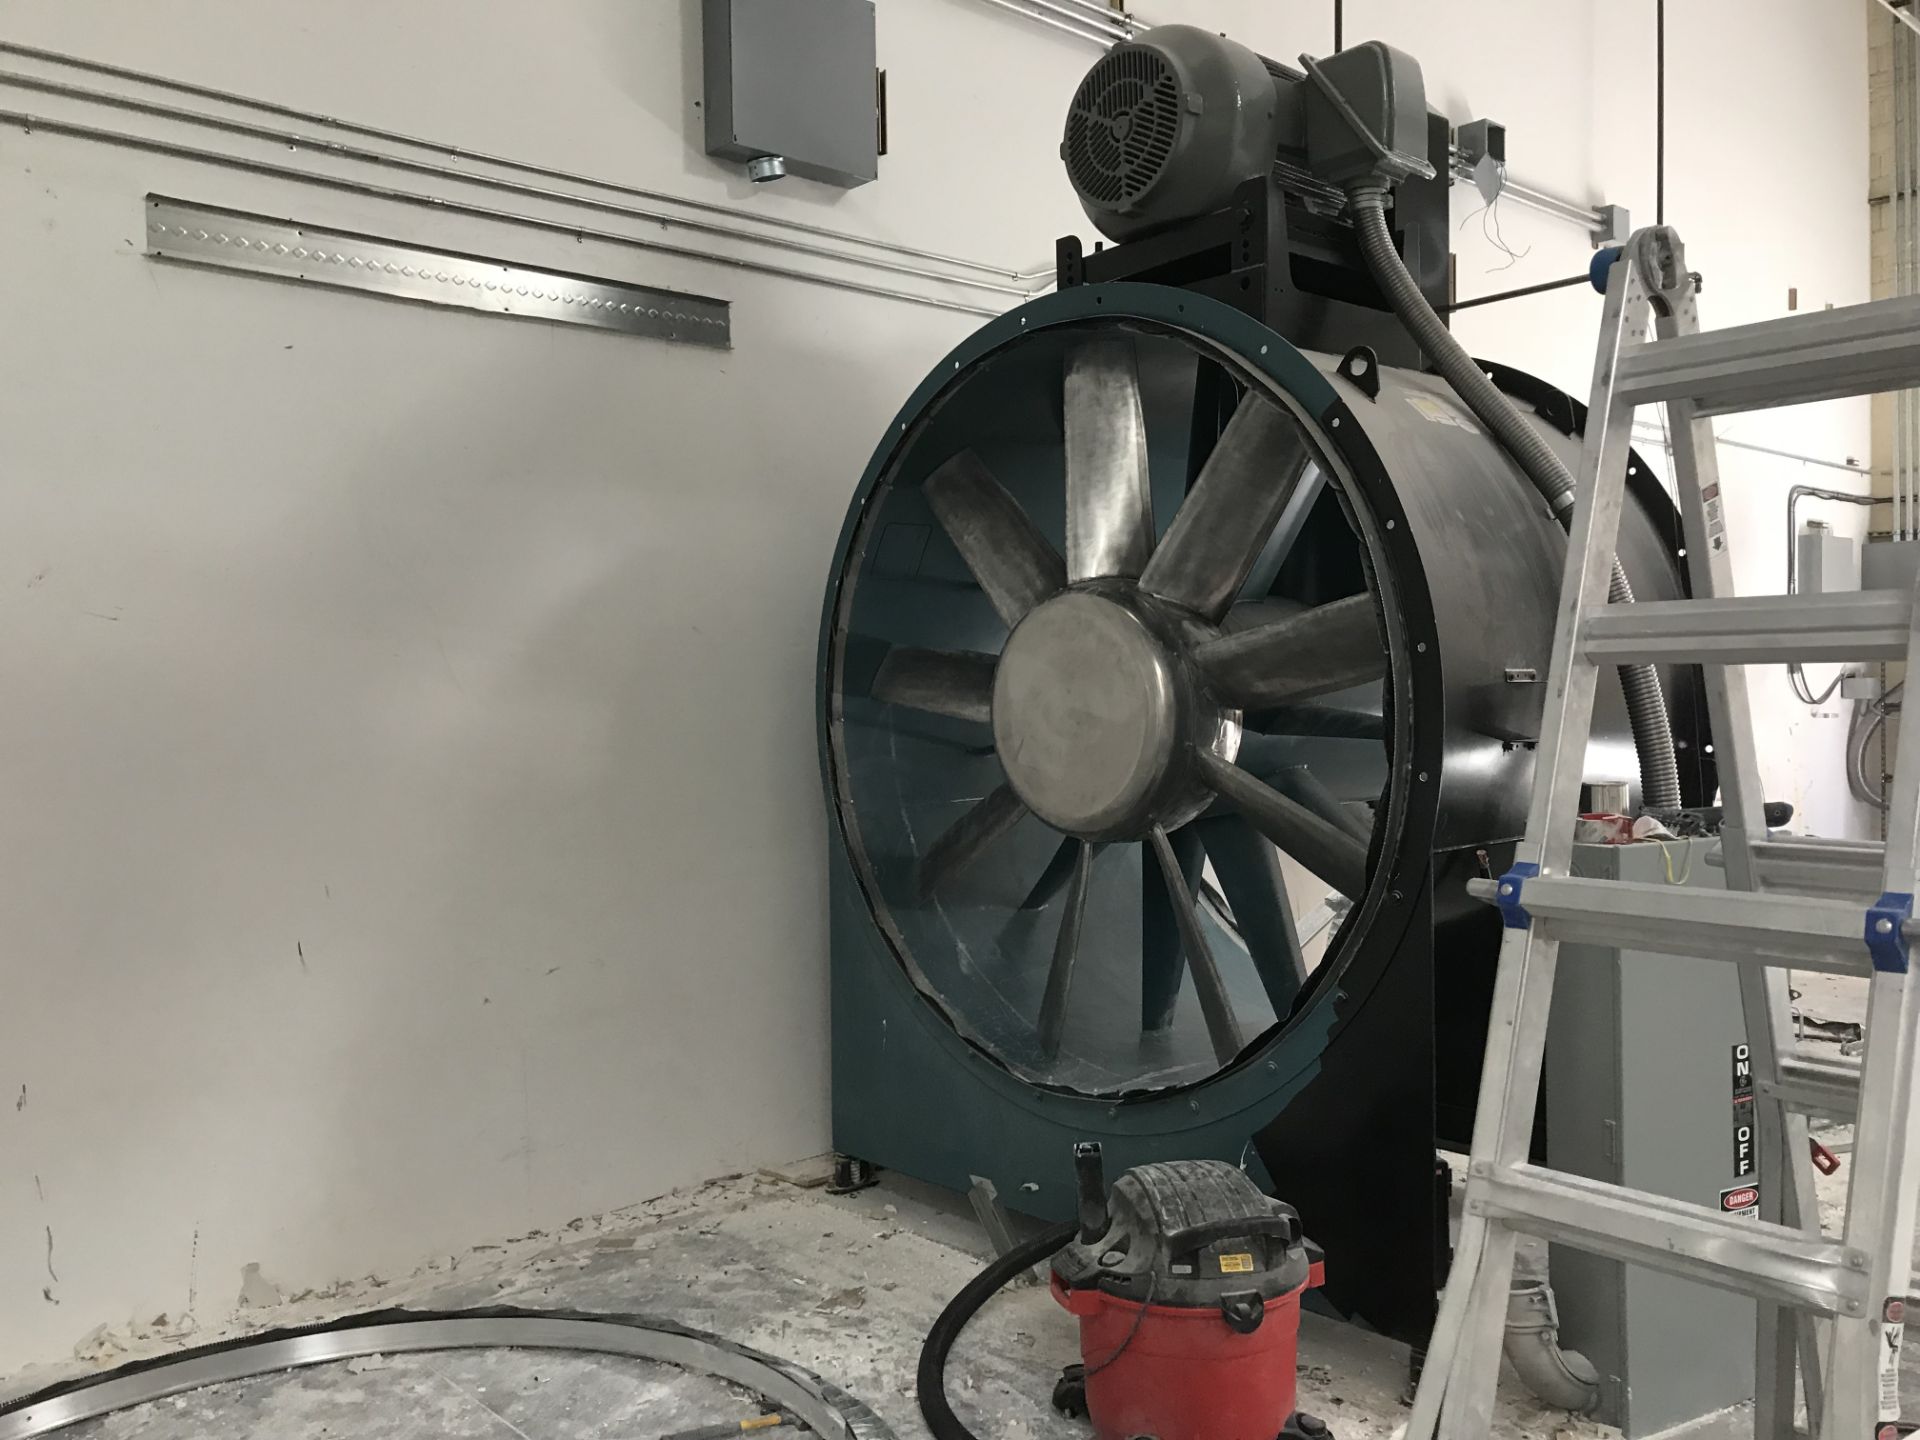 WIND TUNNEL FAN: TWIN CITY FAN & BLOWER, 200,000CFM, 460V 3PH., 125HP MOTOR. LOCATED AT CM RIGGING - Image 2 of 3